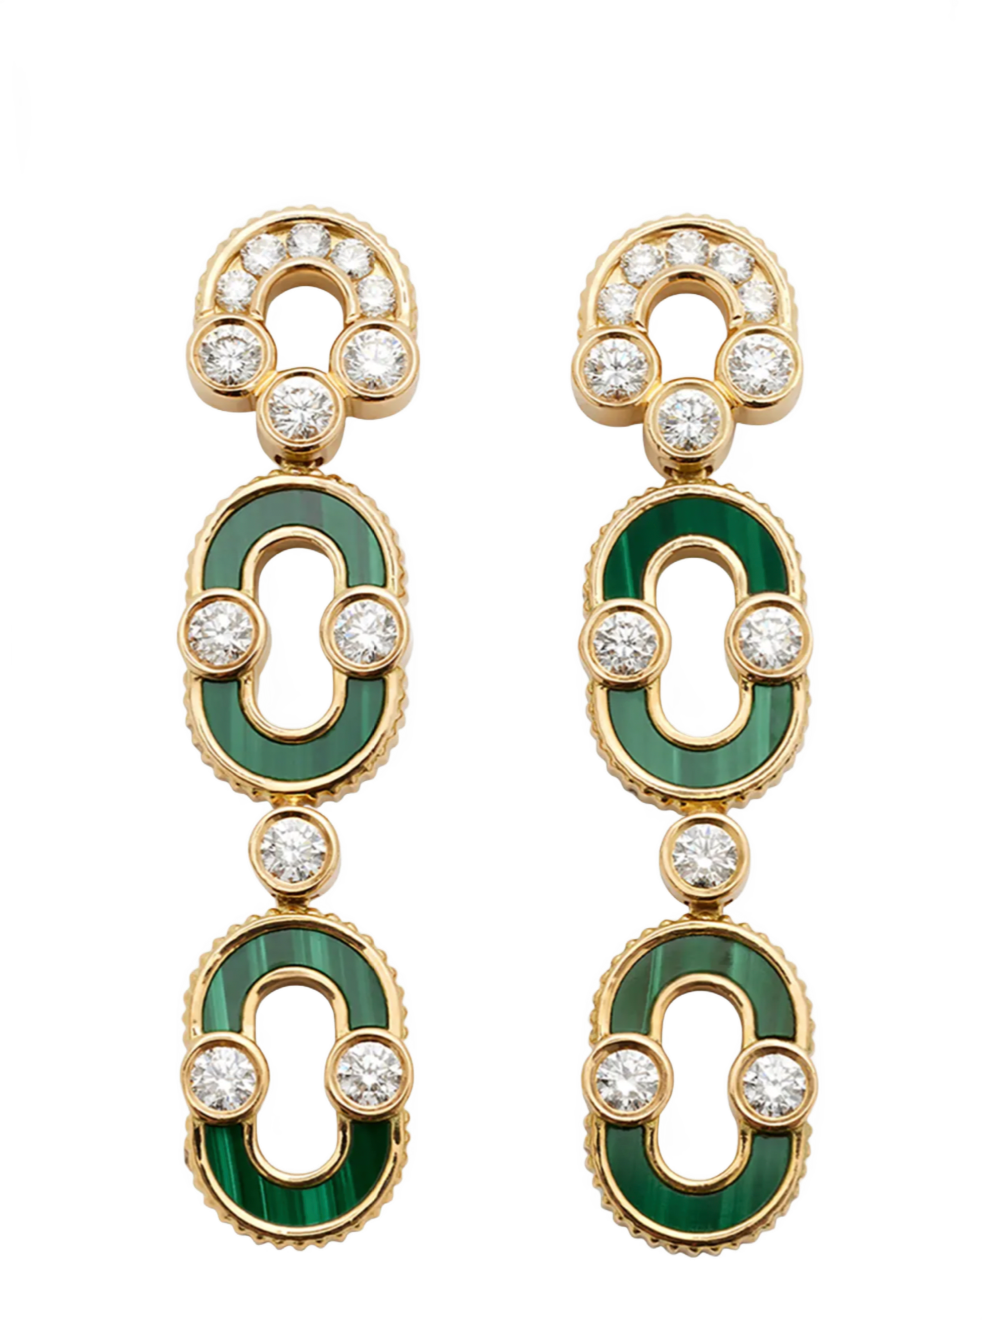 Magnetic Duo Earrings in Malachite, 18K Yellow Gold and Diamonds